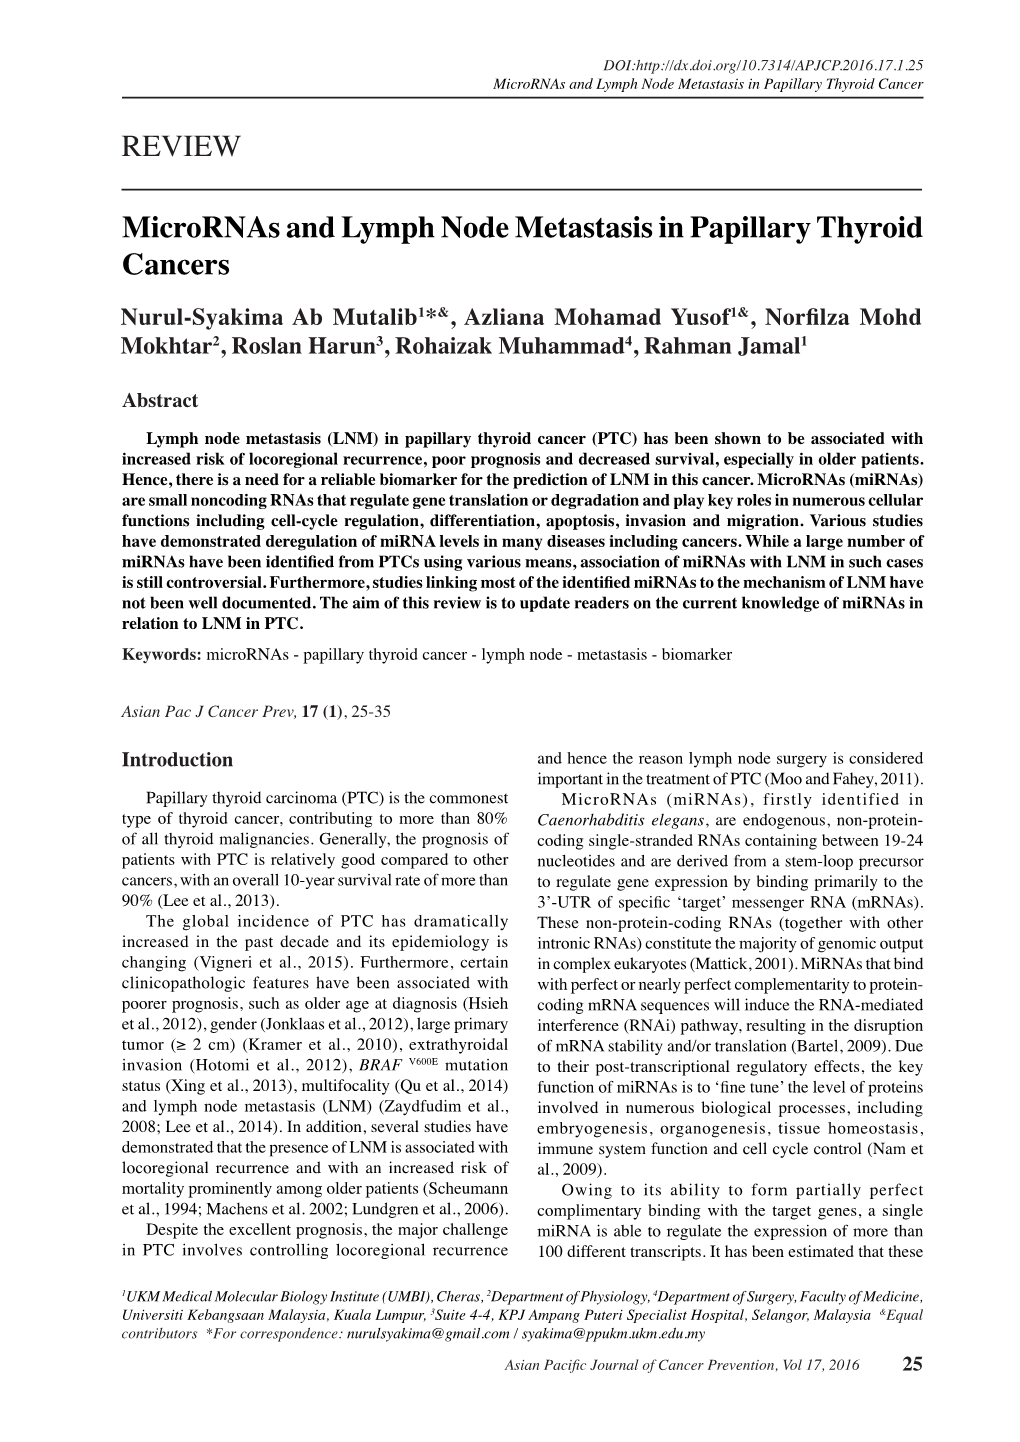 REVIEW Micrornas and Lymph Node Metastasis in Papillary Thyroid Cancers